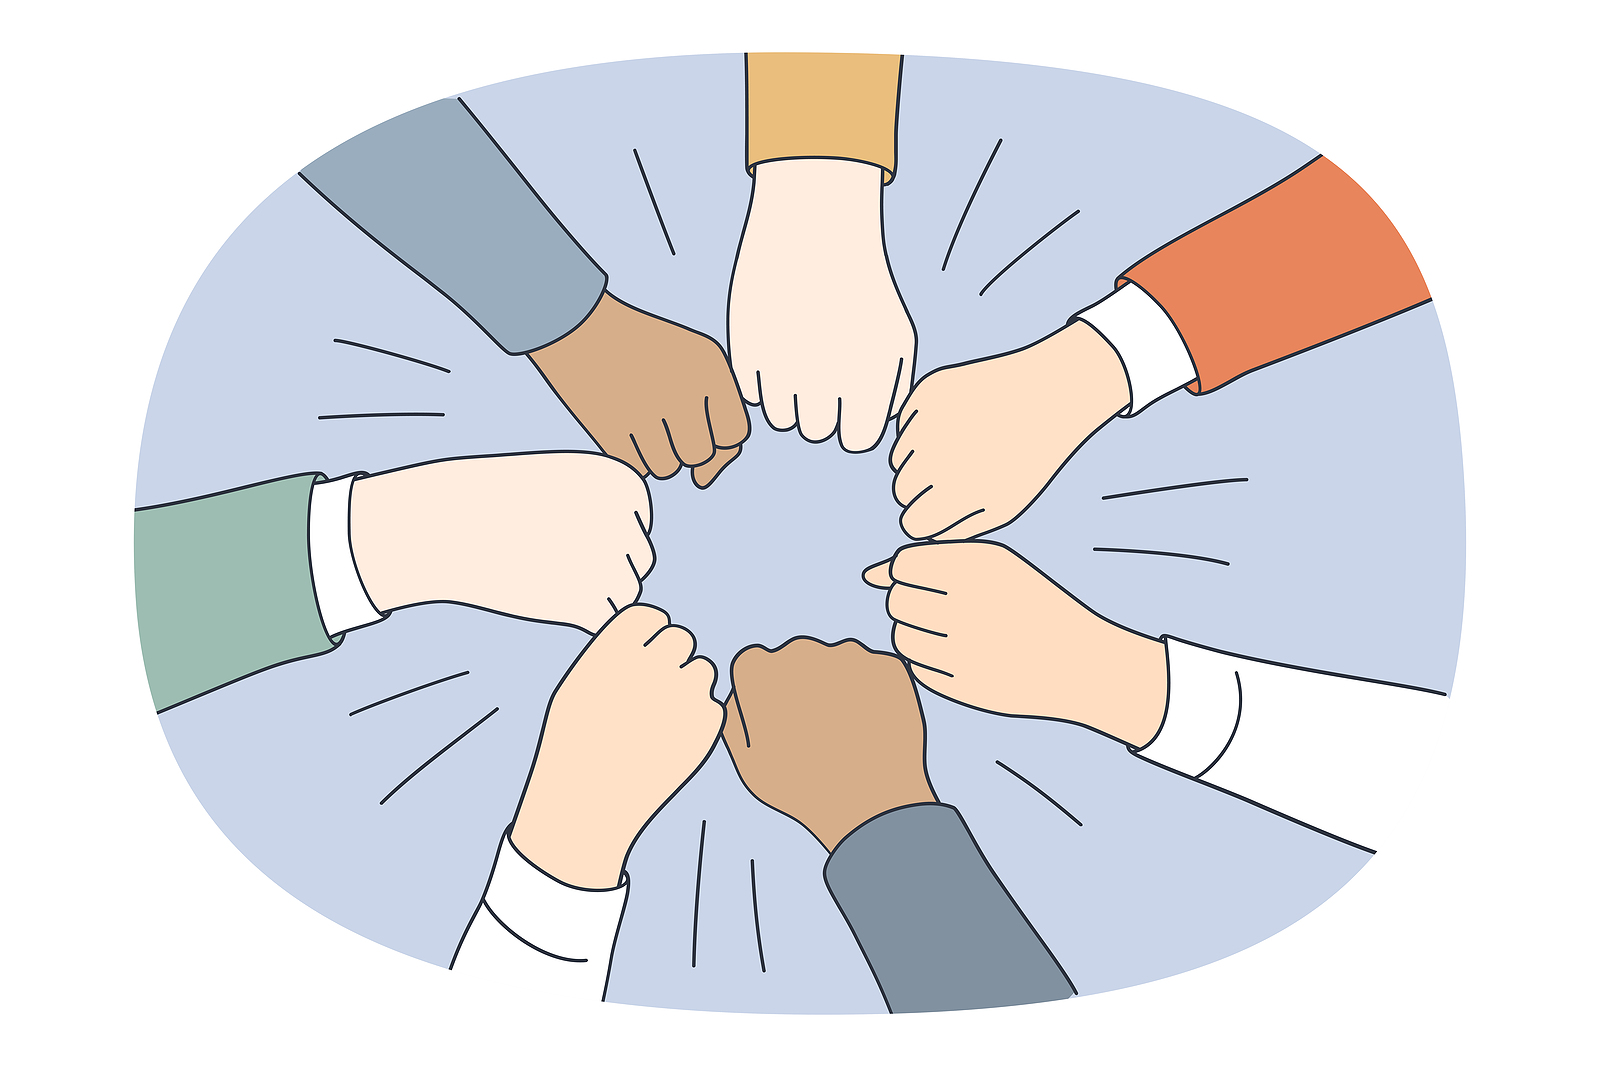 Collaboration teamwork and unity concept. Top view of diverse multi racial group of people pulling fists together in circle meaning togetherness and tolerance vector illustration